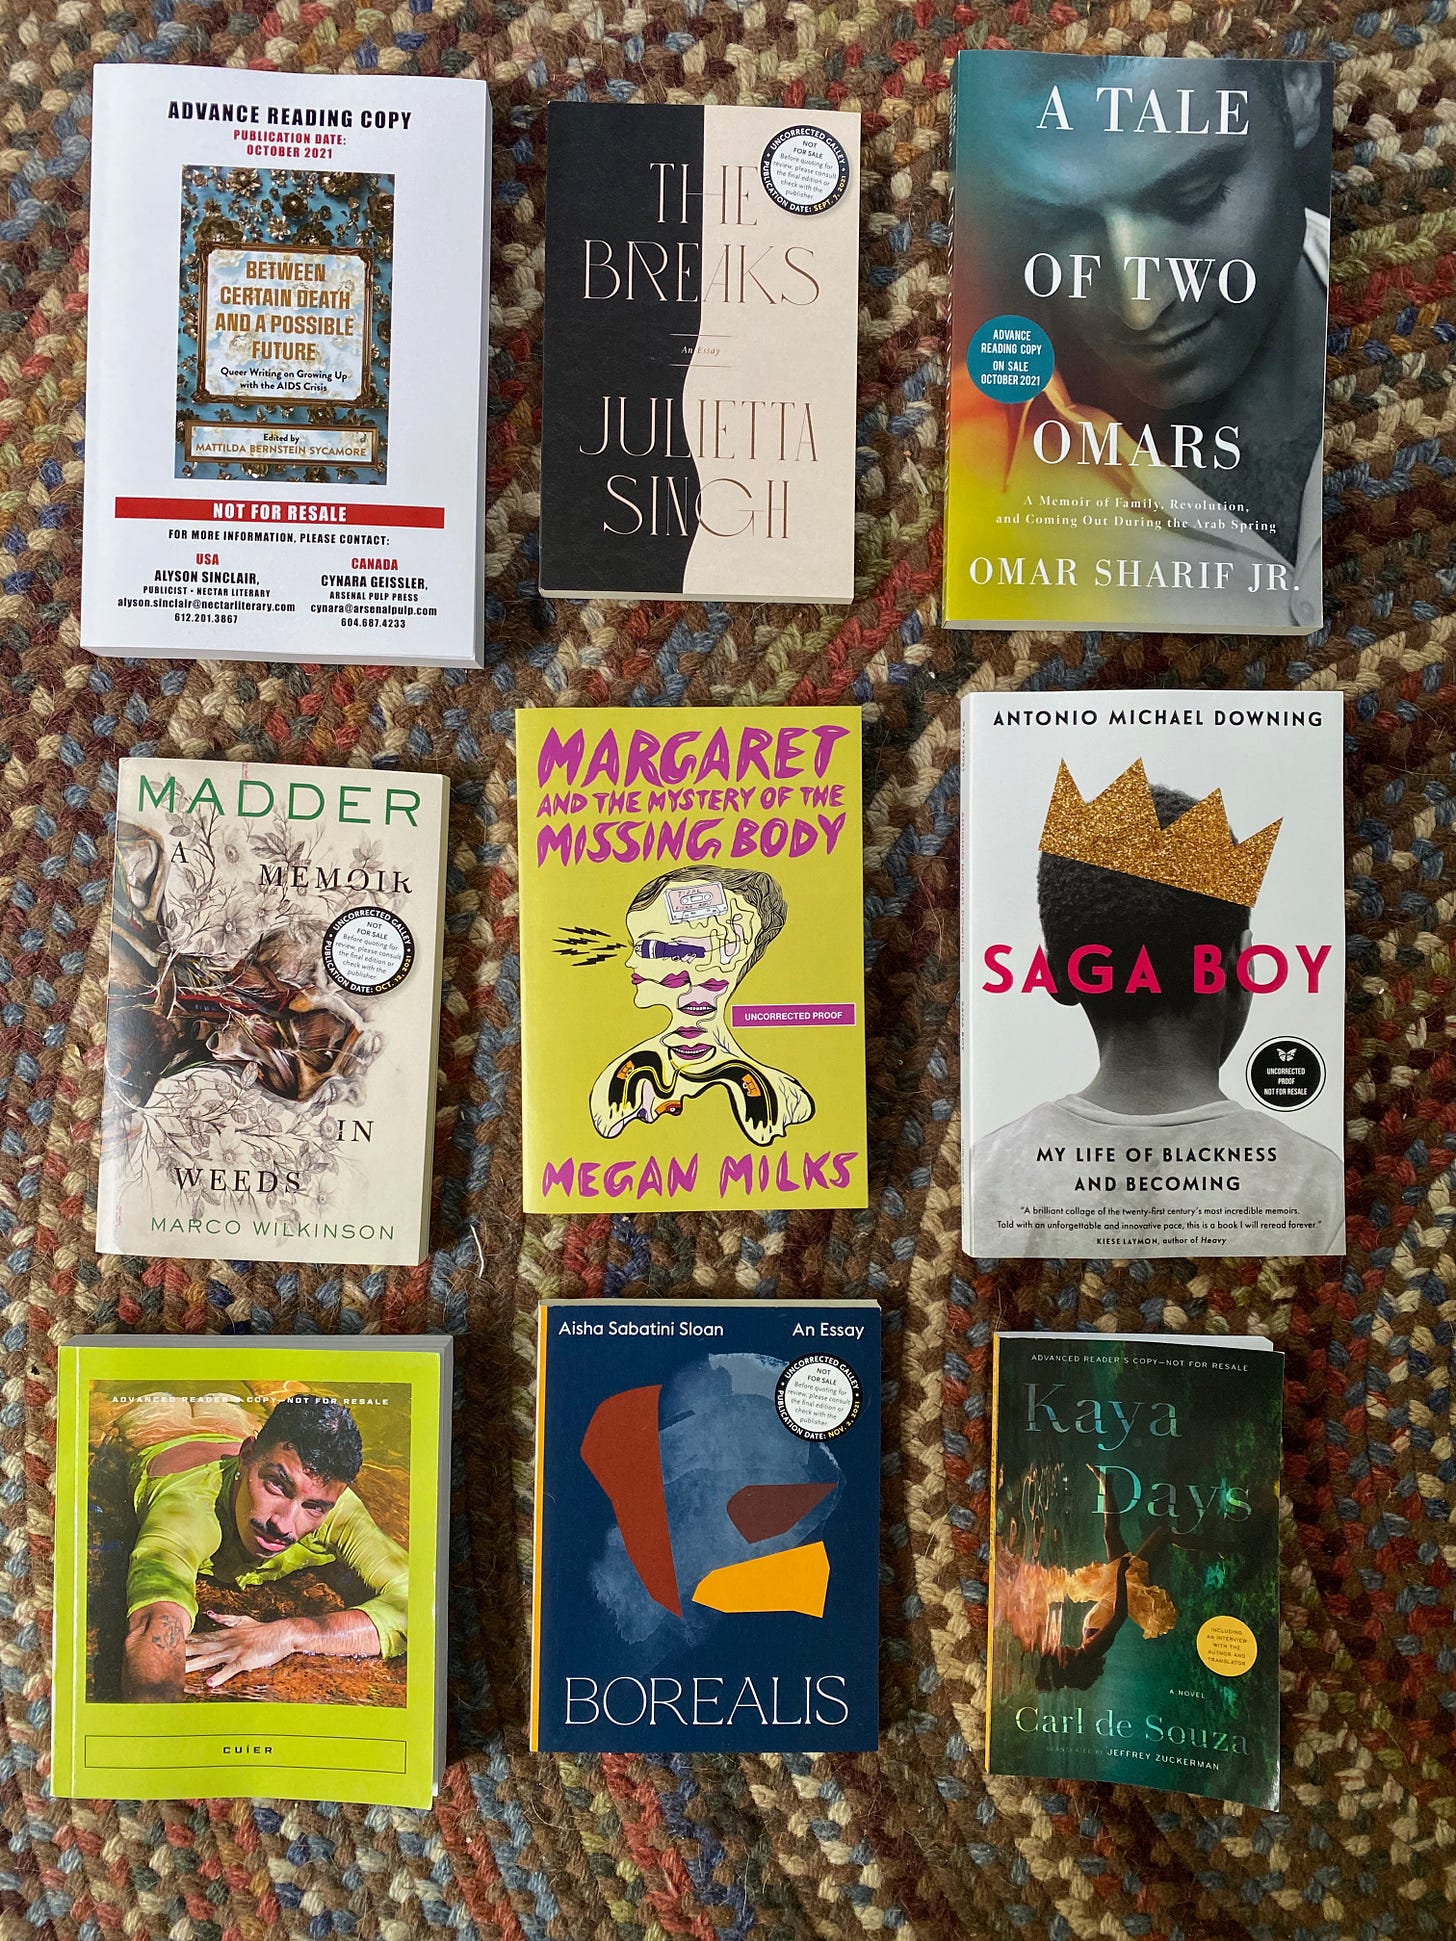 Nine books arranged in a rectangle on a braided rug: Between Certain Death and a Possible Future, The Breaks, A Tale of Two Omars, Madder, Margaret and the Mystery of the Missing Body, Saga Boy, Cuíer, Borealis, and Kaya Days.